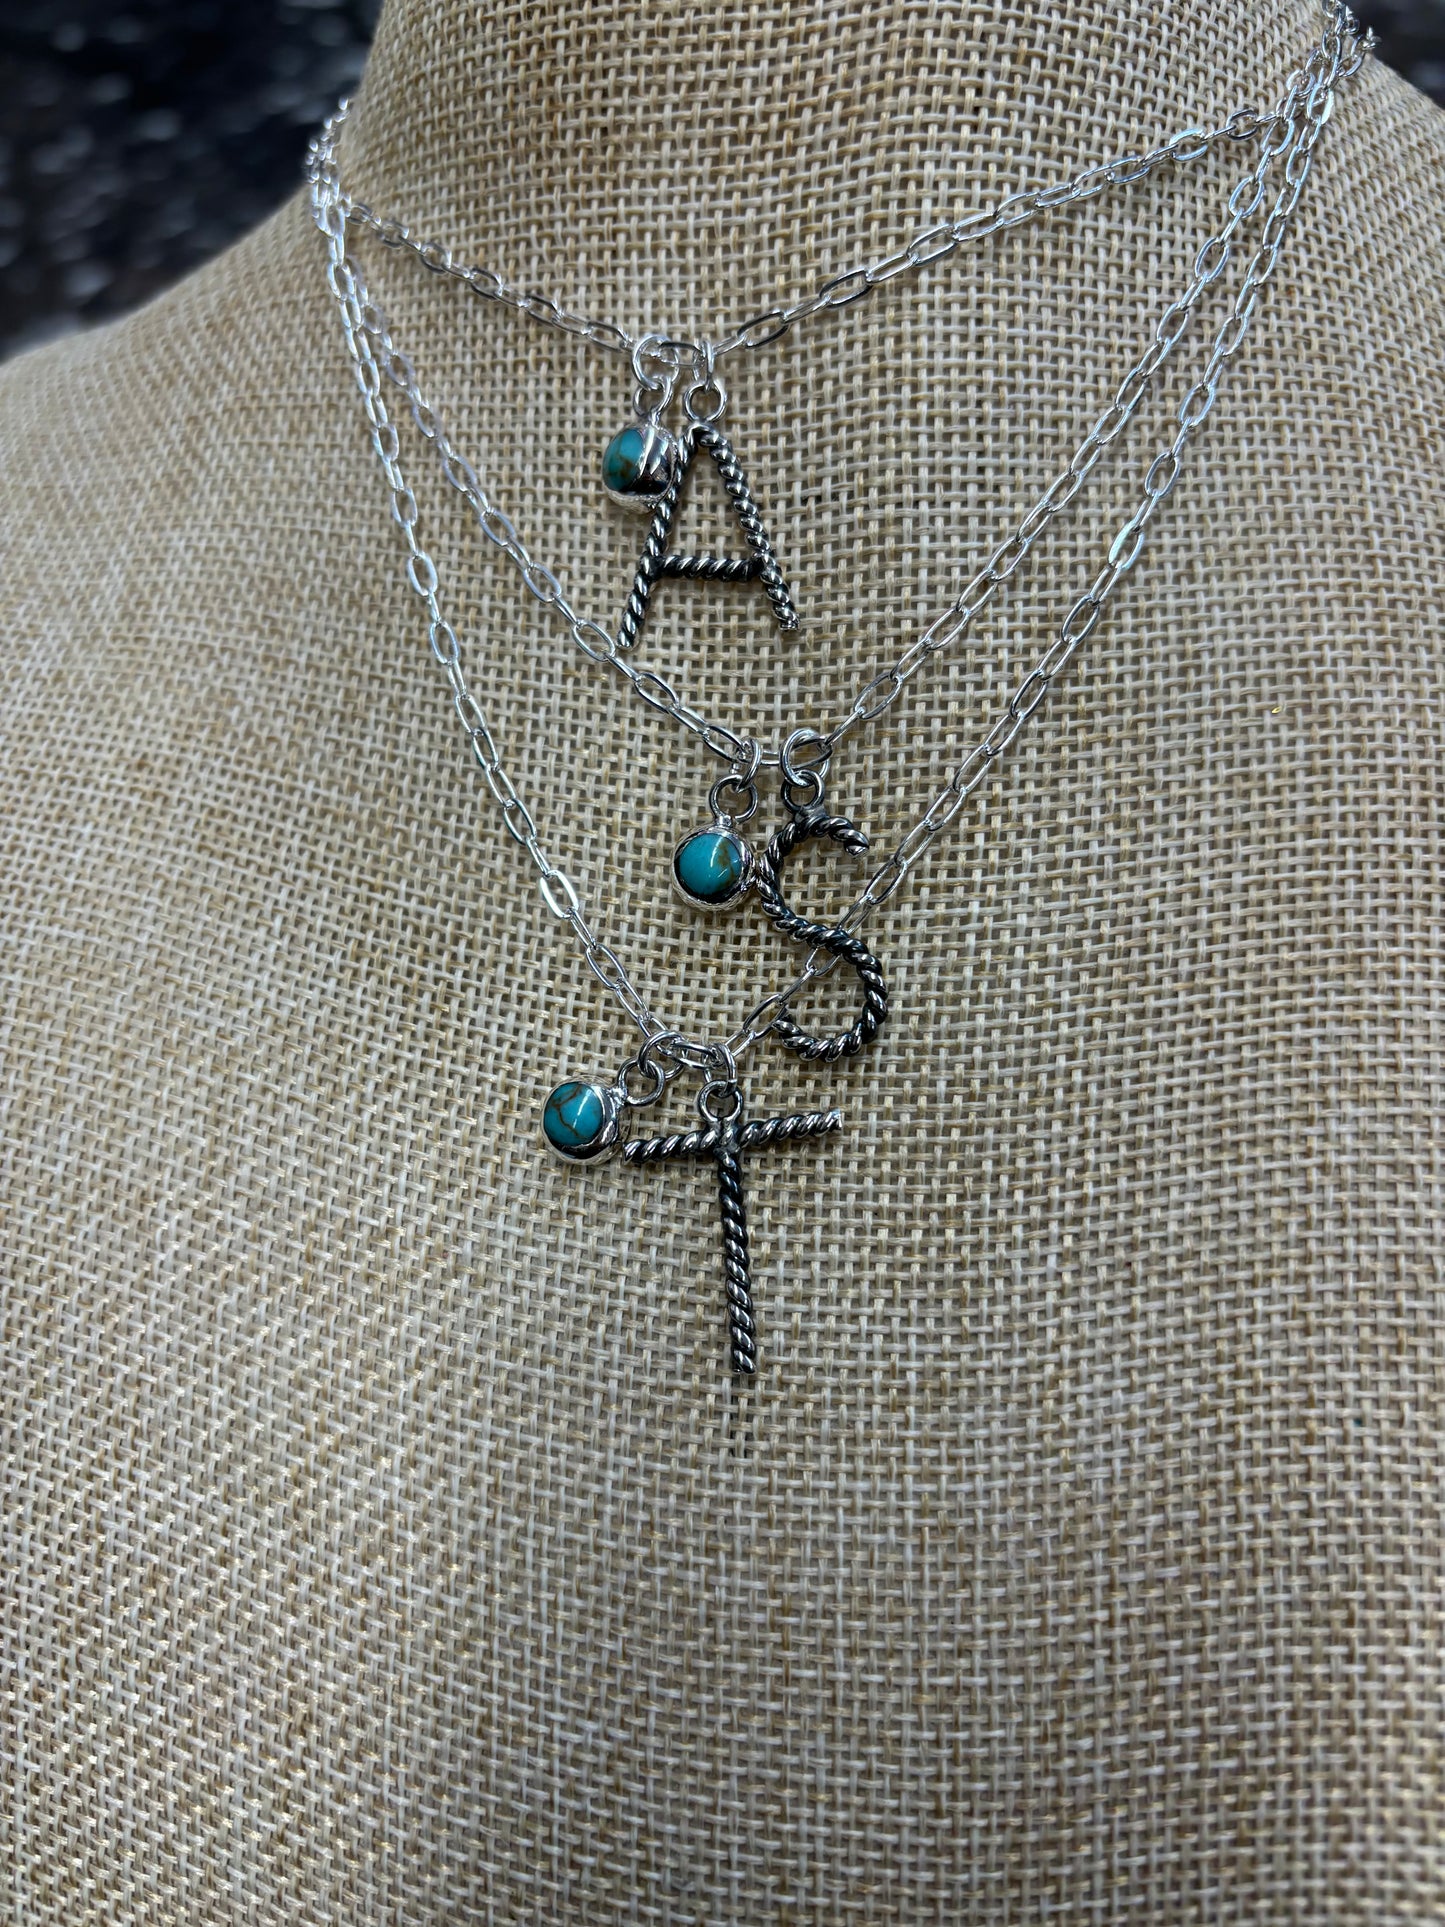 The Gone Ropin' Initial Necklace